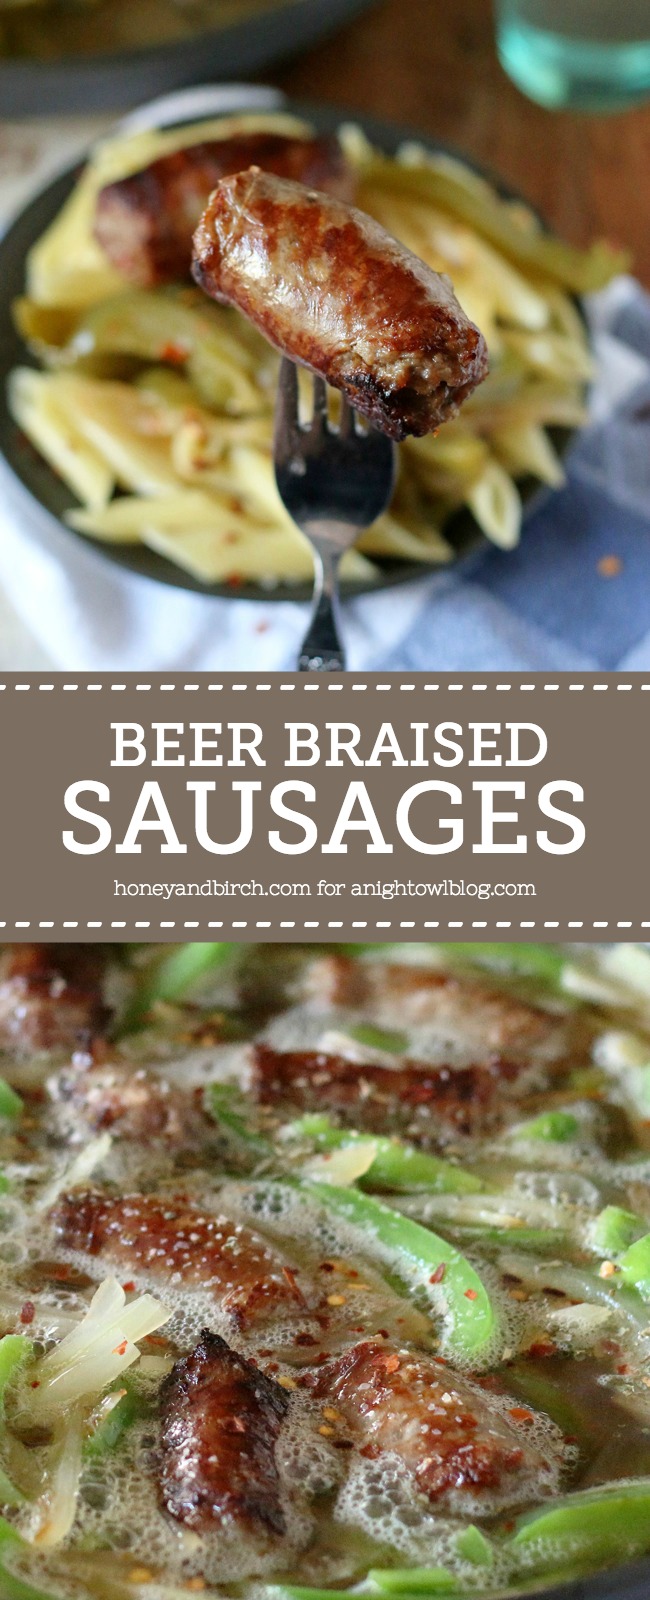 Beer Braised Sausages are an easy, hearty meal that is flavorful - just the right amount of spicy and sweet!